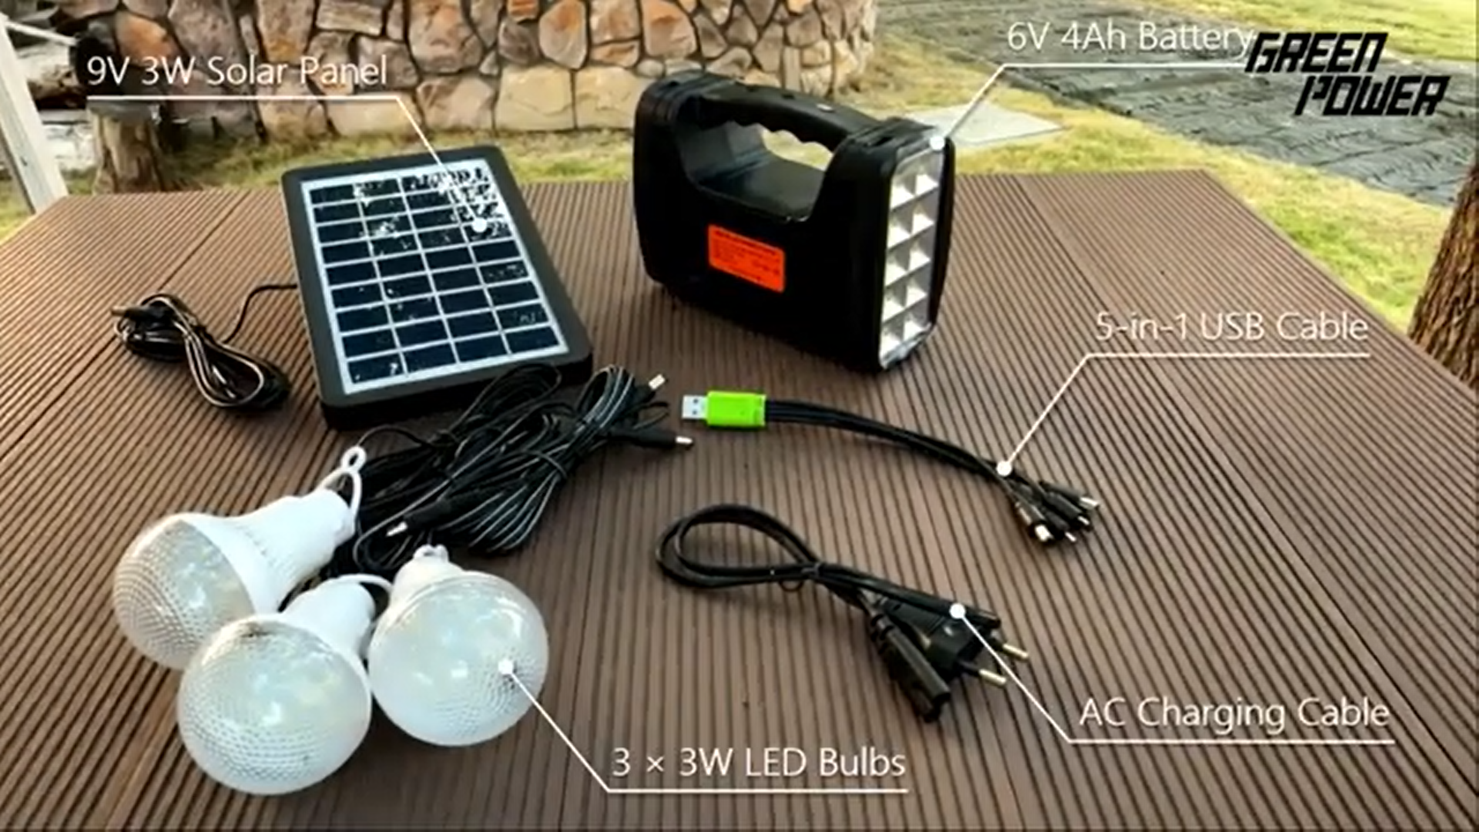 GP 351 Mini Solar Lighting Kits-a simple & quick solution to illuminate homes lacking electricity